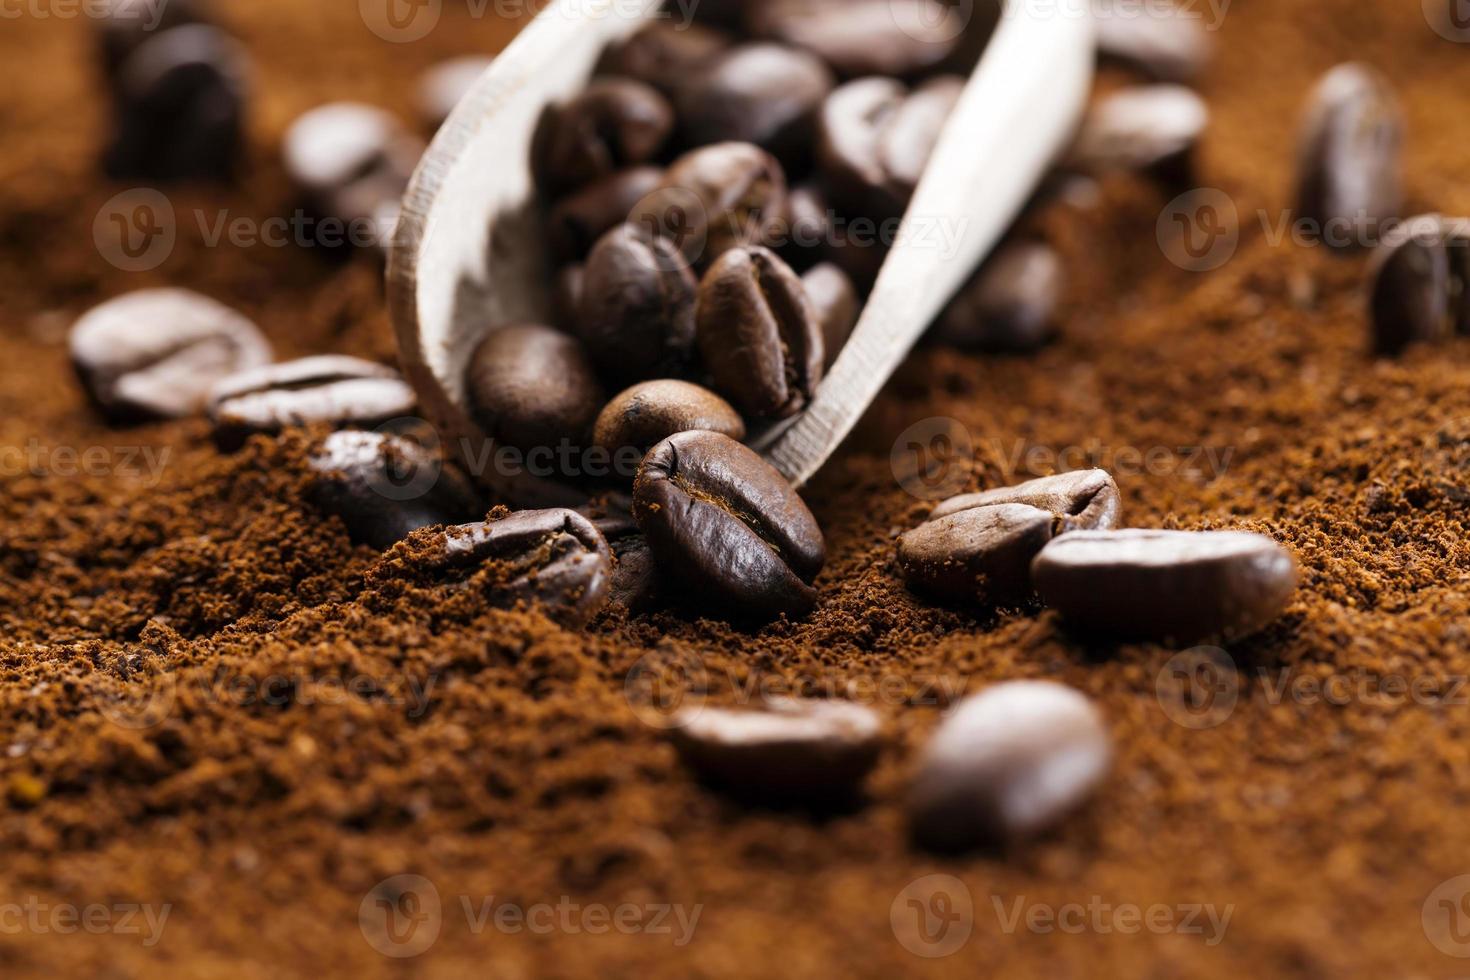 https://static.vecteezy.com/system/resources/previews/009/719/094/non_2x/close-up-of-coffee-beans-for-making-a-real-drink-photo.jpg